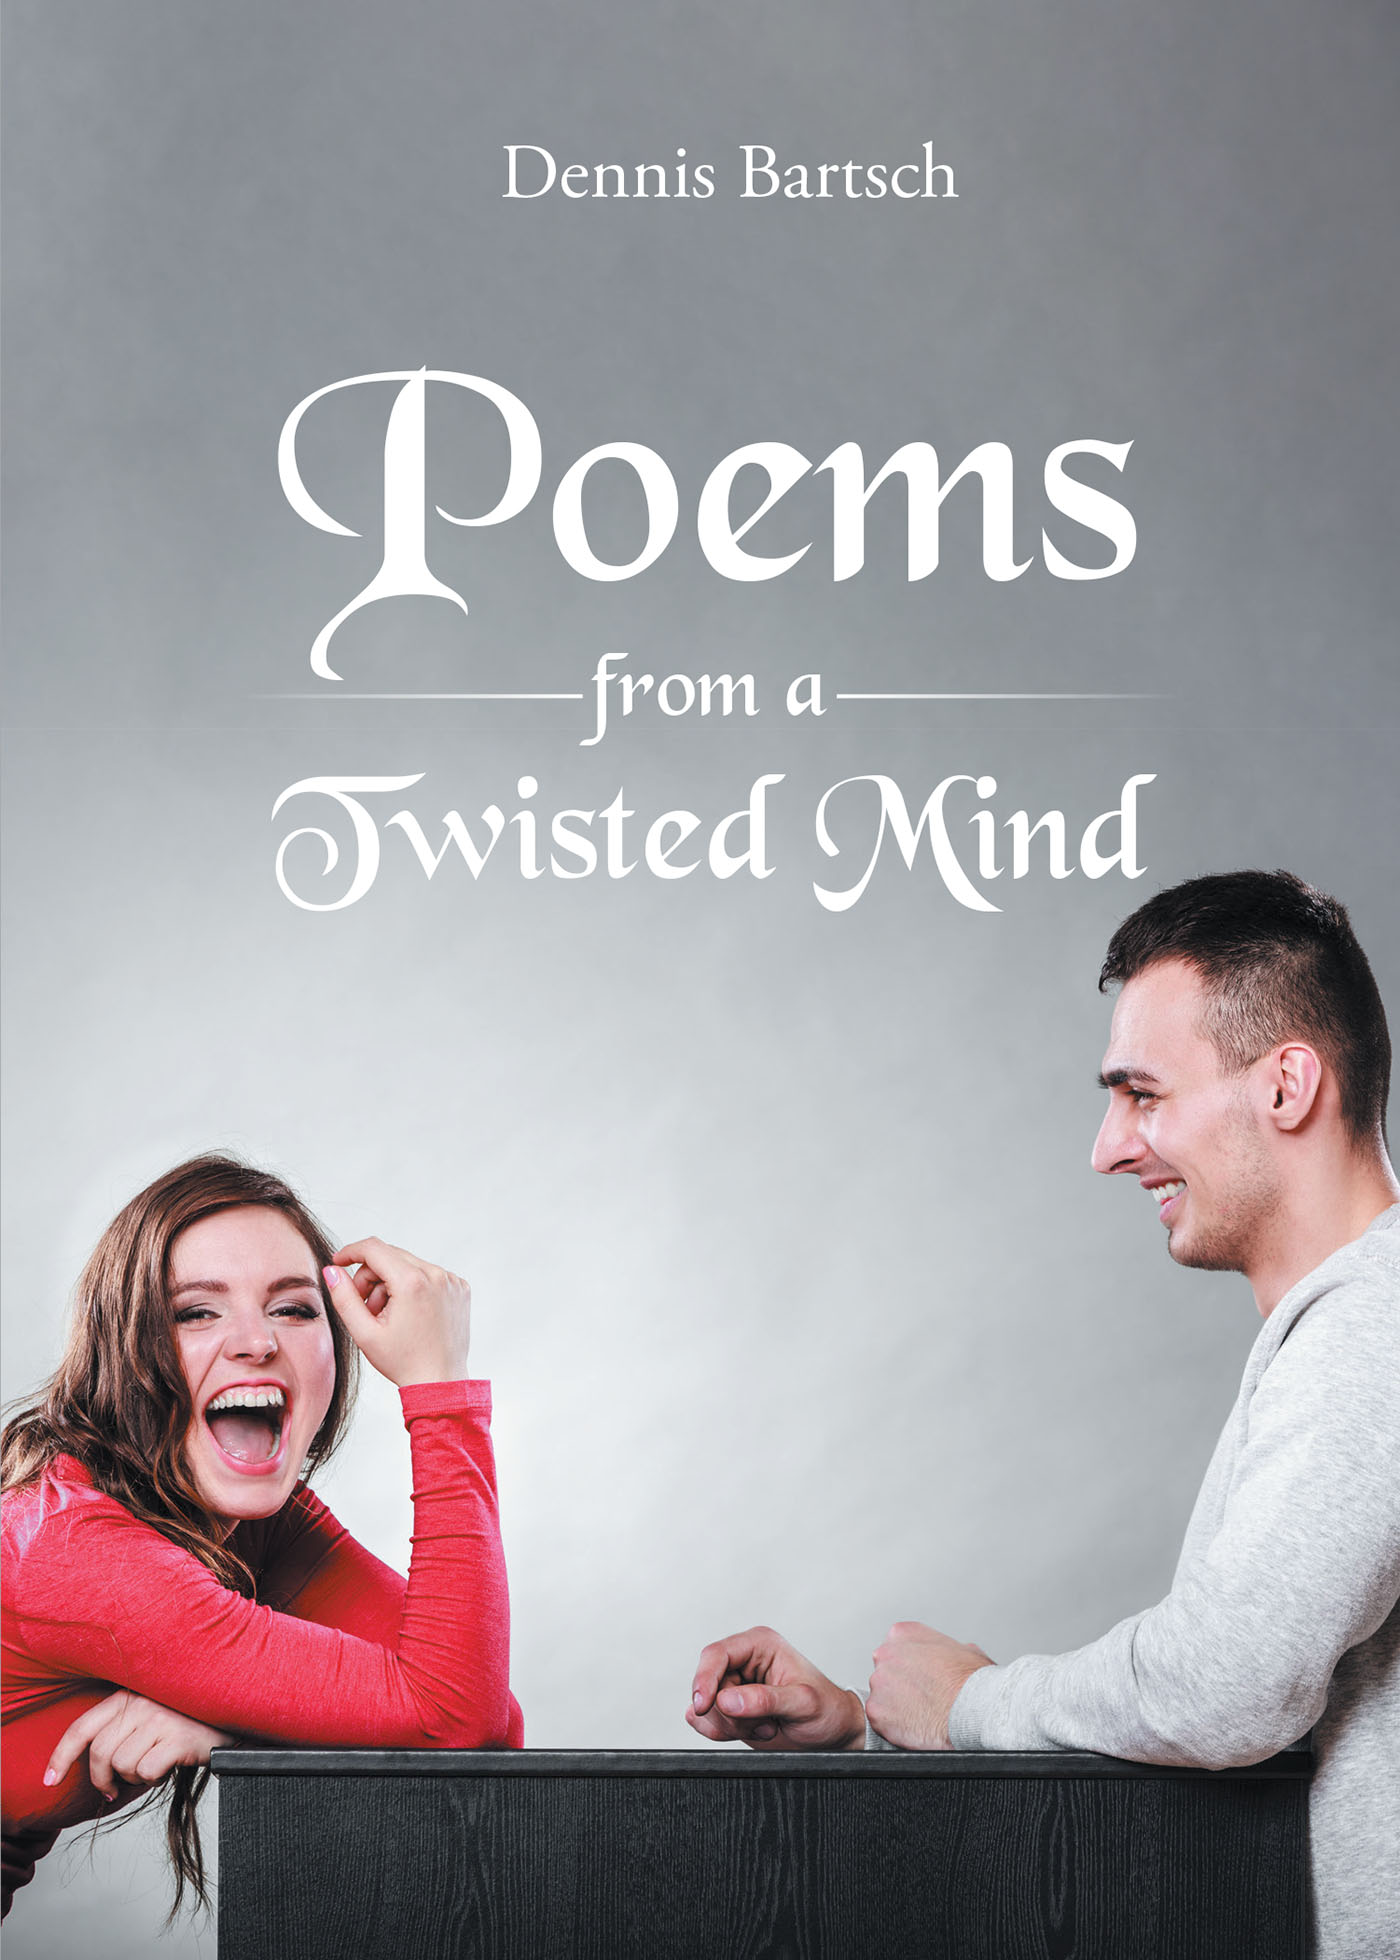 Author Dennis Bartsch’s New Book, "Poems from a Twisted Mind," is a Set of Funny Poems Meant to Make Women Laugh